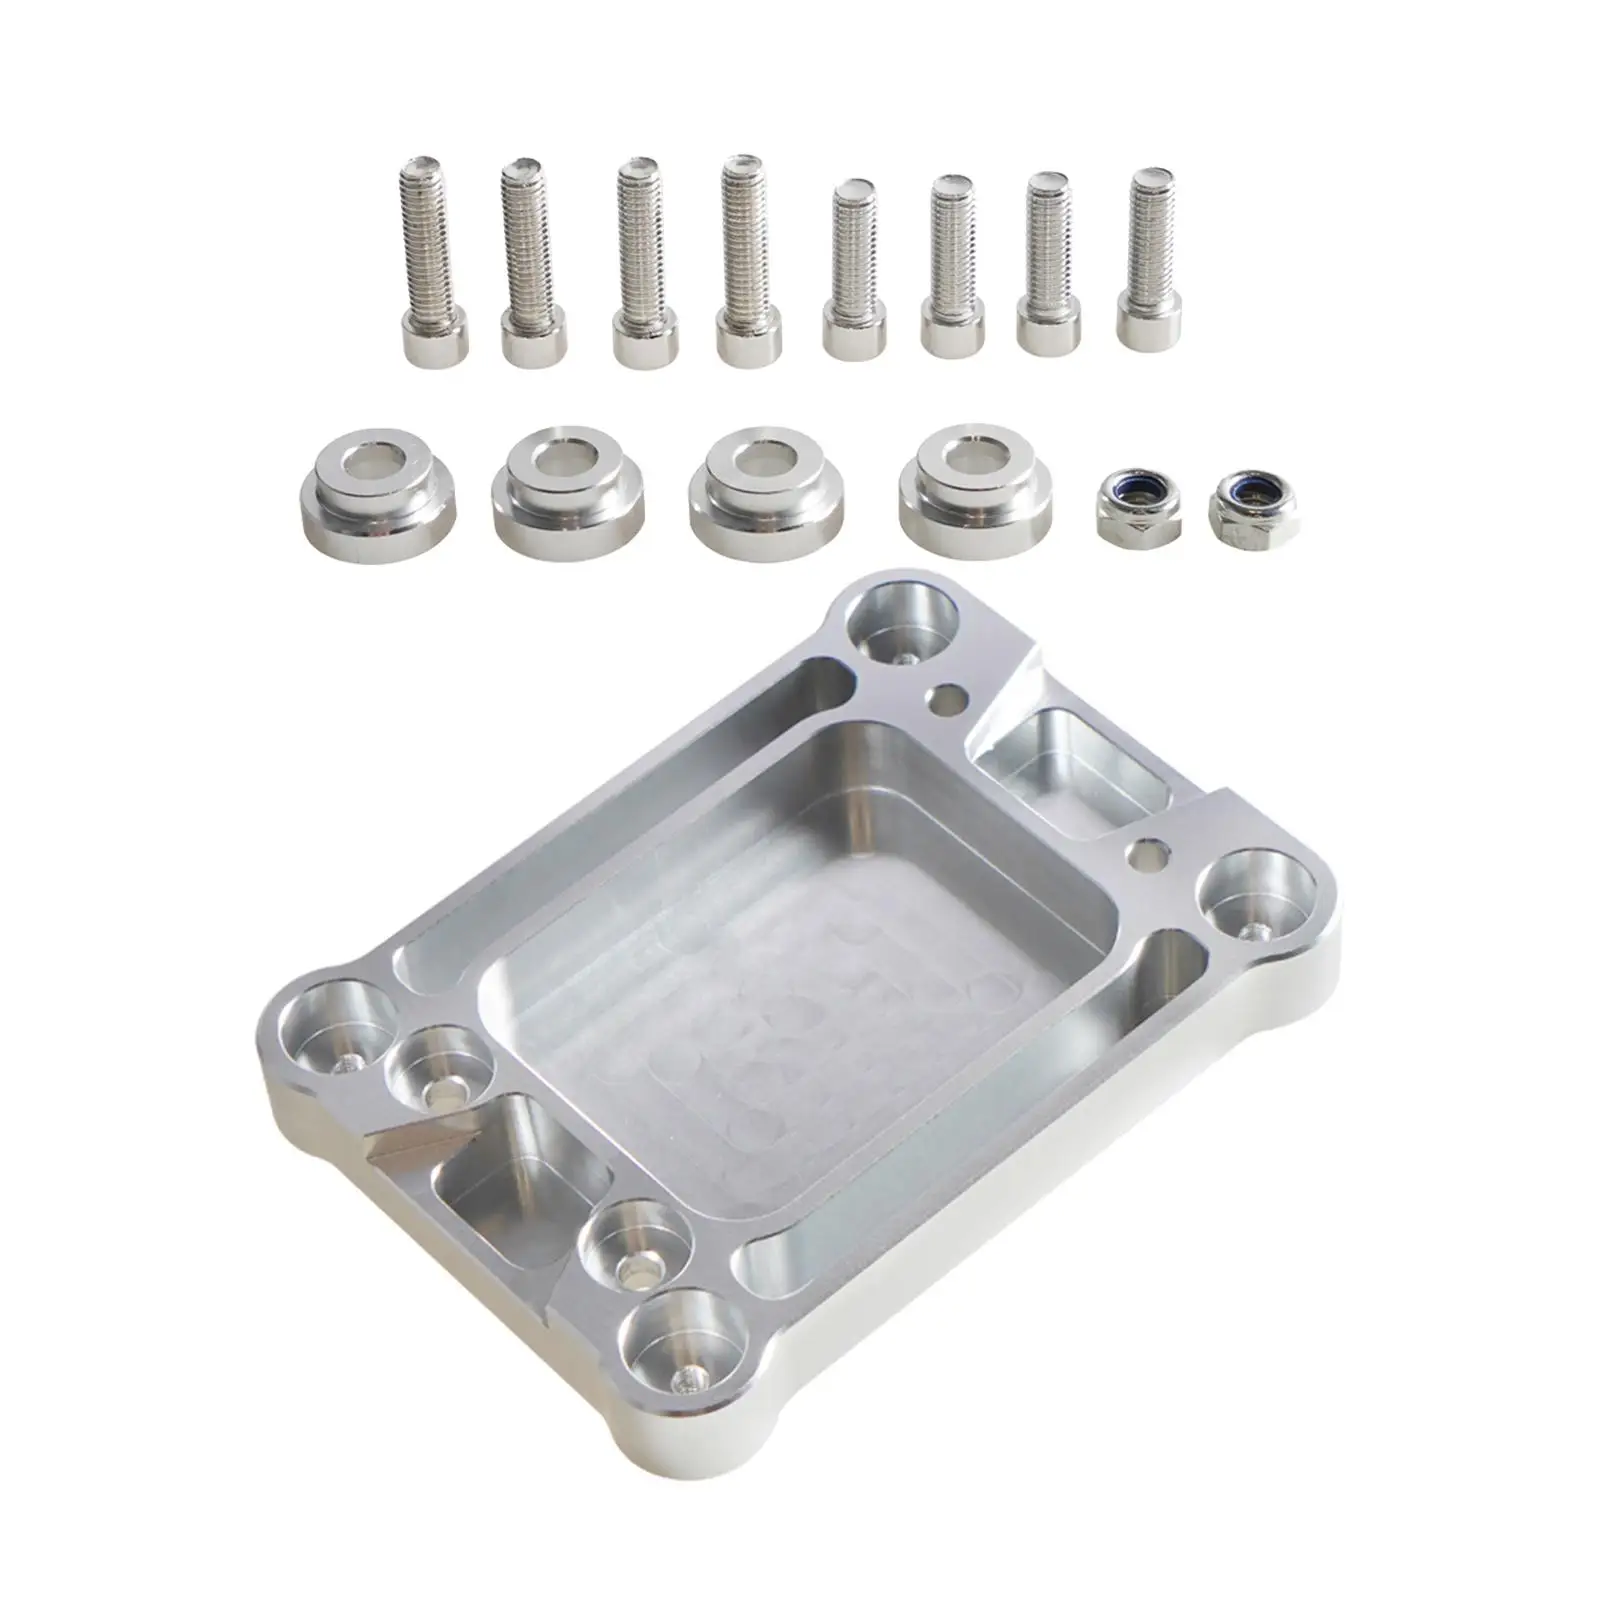 Billet Shifter Box Base Plate Durable Replacement Parts Shift Lever Base for Acura Integra 1994-2001 Civic 1988-2000